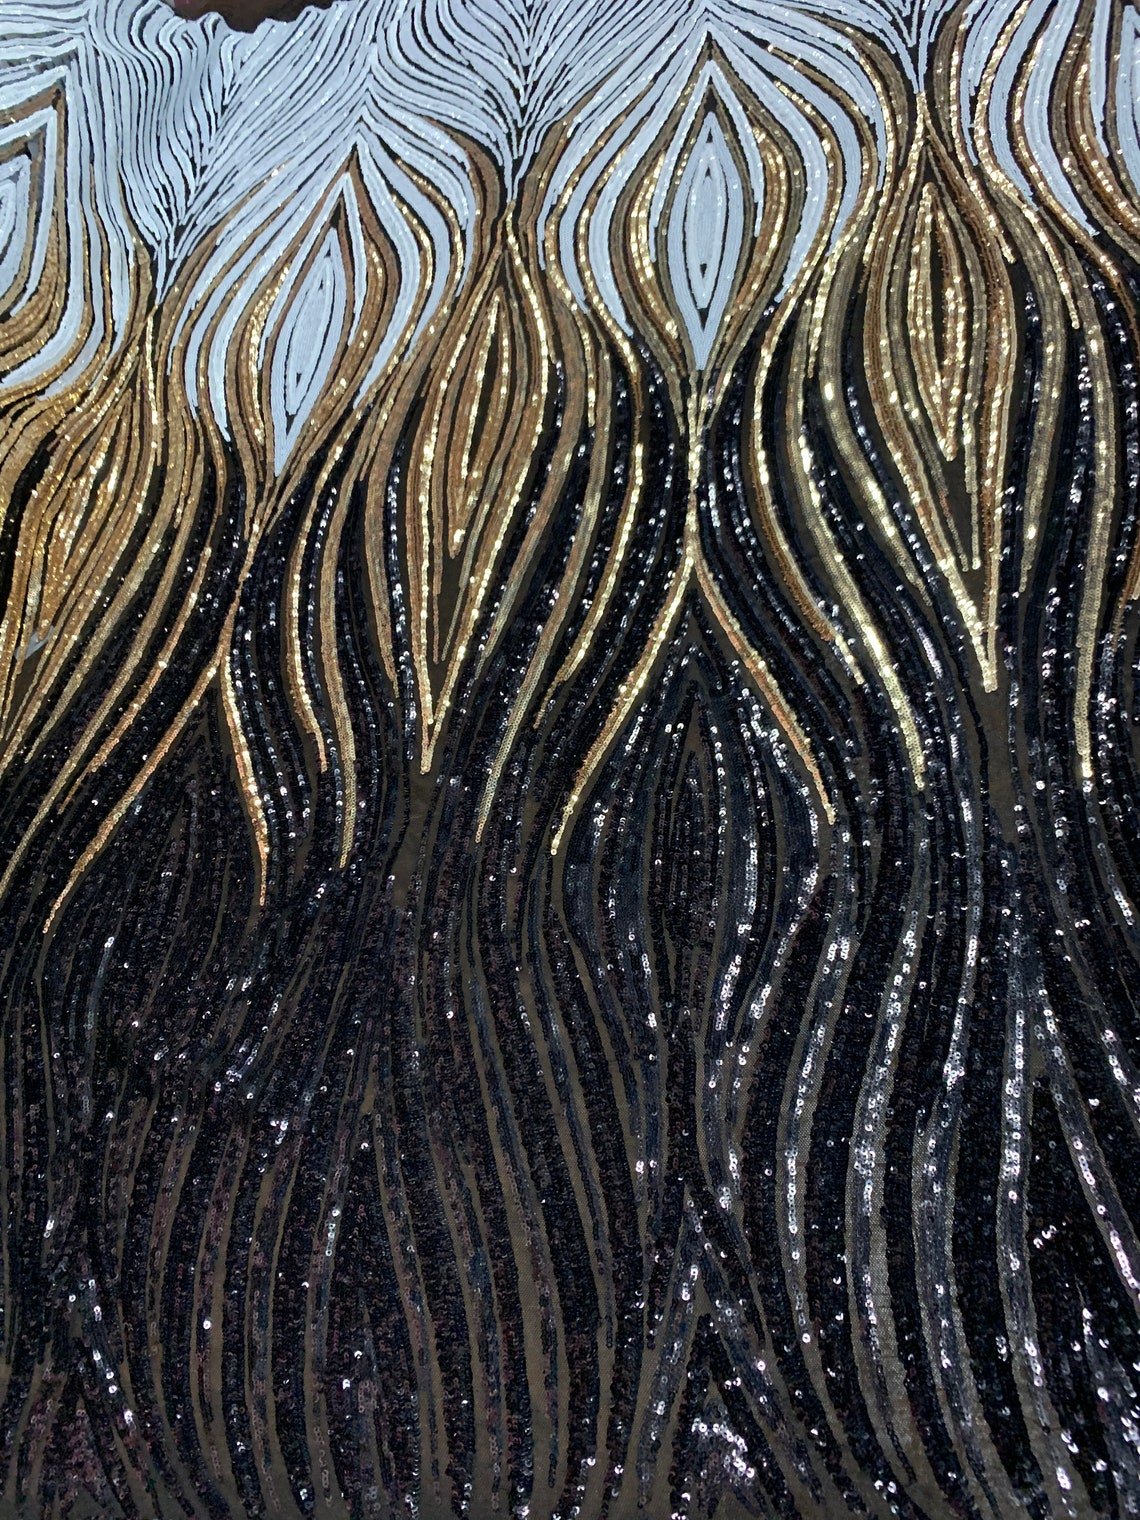 Gold sequin Fabric on White, Gold, Navy Black stretch fabricGold Sequin FabricICE FABRICSICE FABRICSBy The YardGold sequin Fabric on White, Gold, Navy Black stretch fabric ICE FABRICS